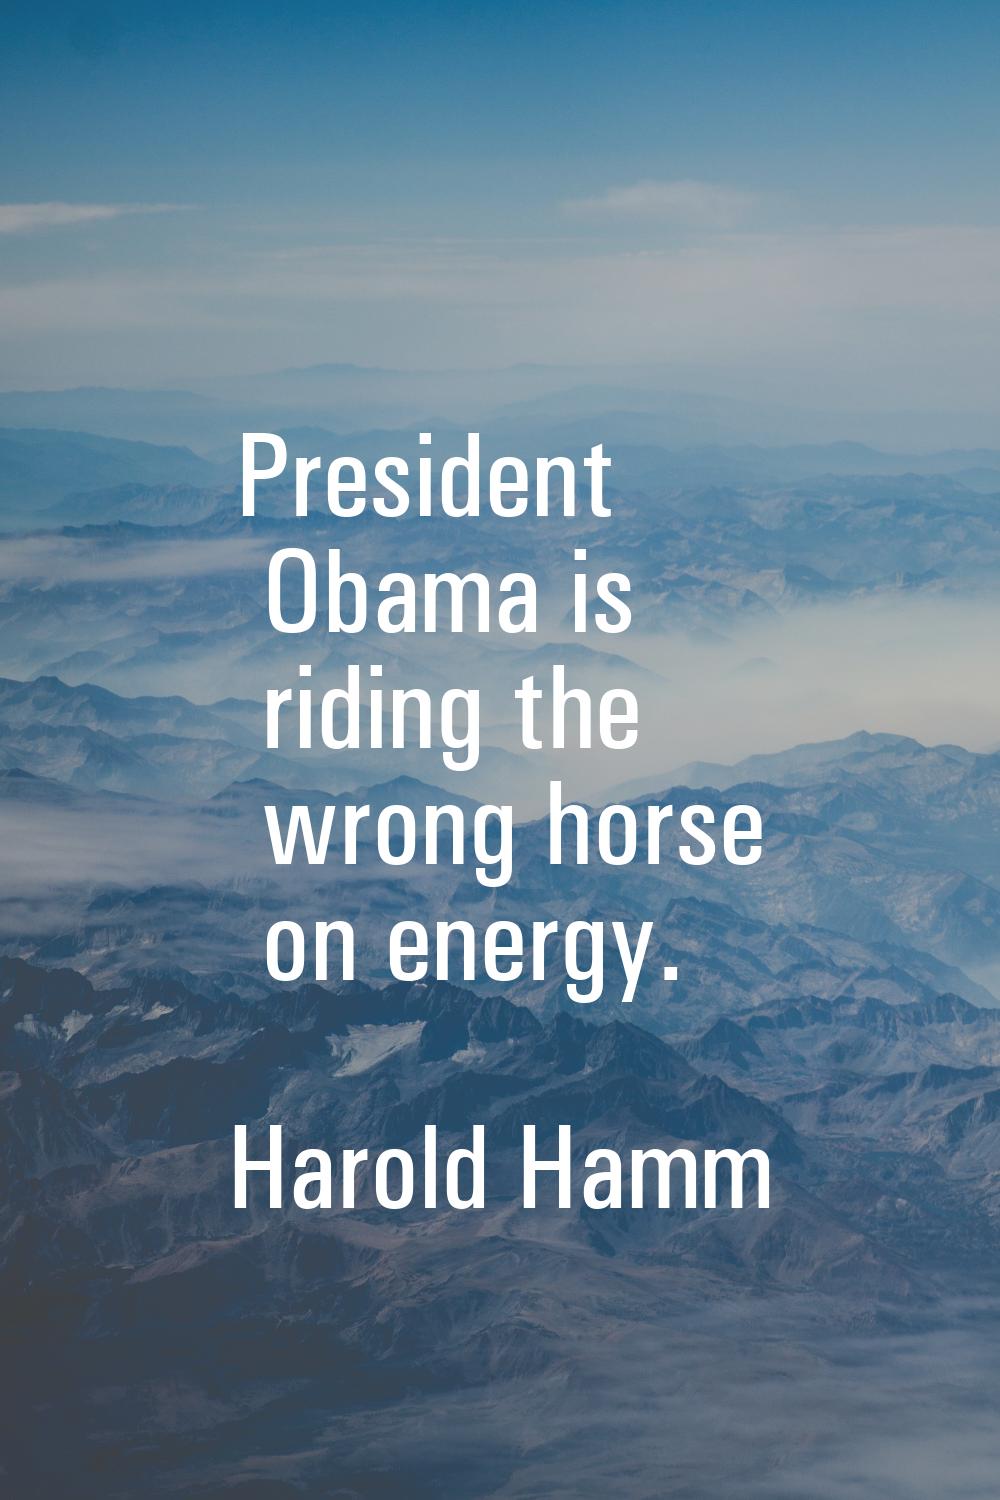 President Obama is riding the wrong horse on energy.